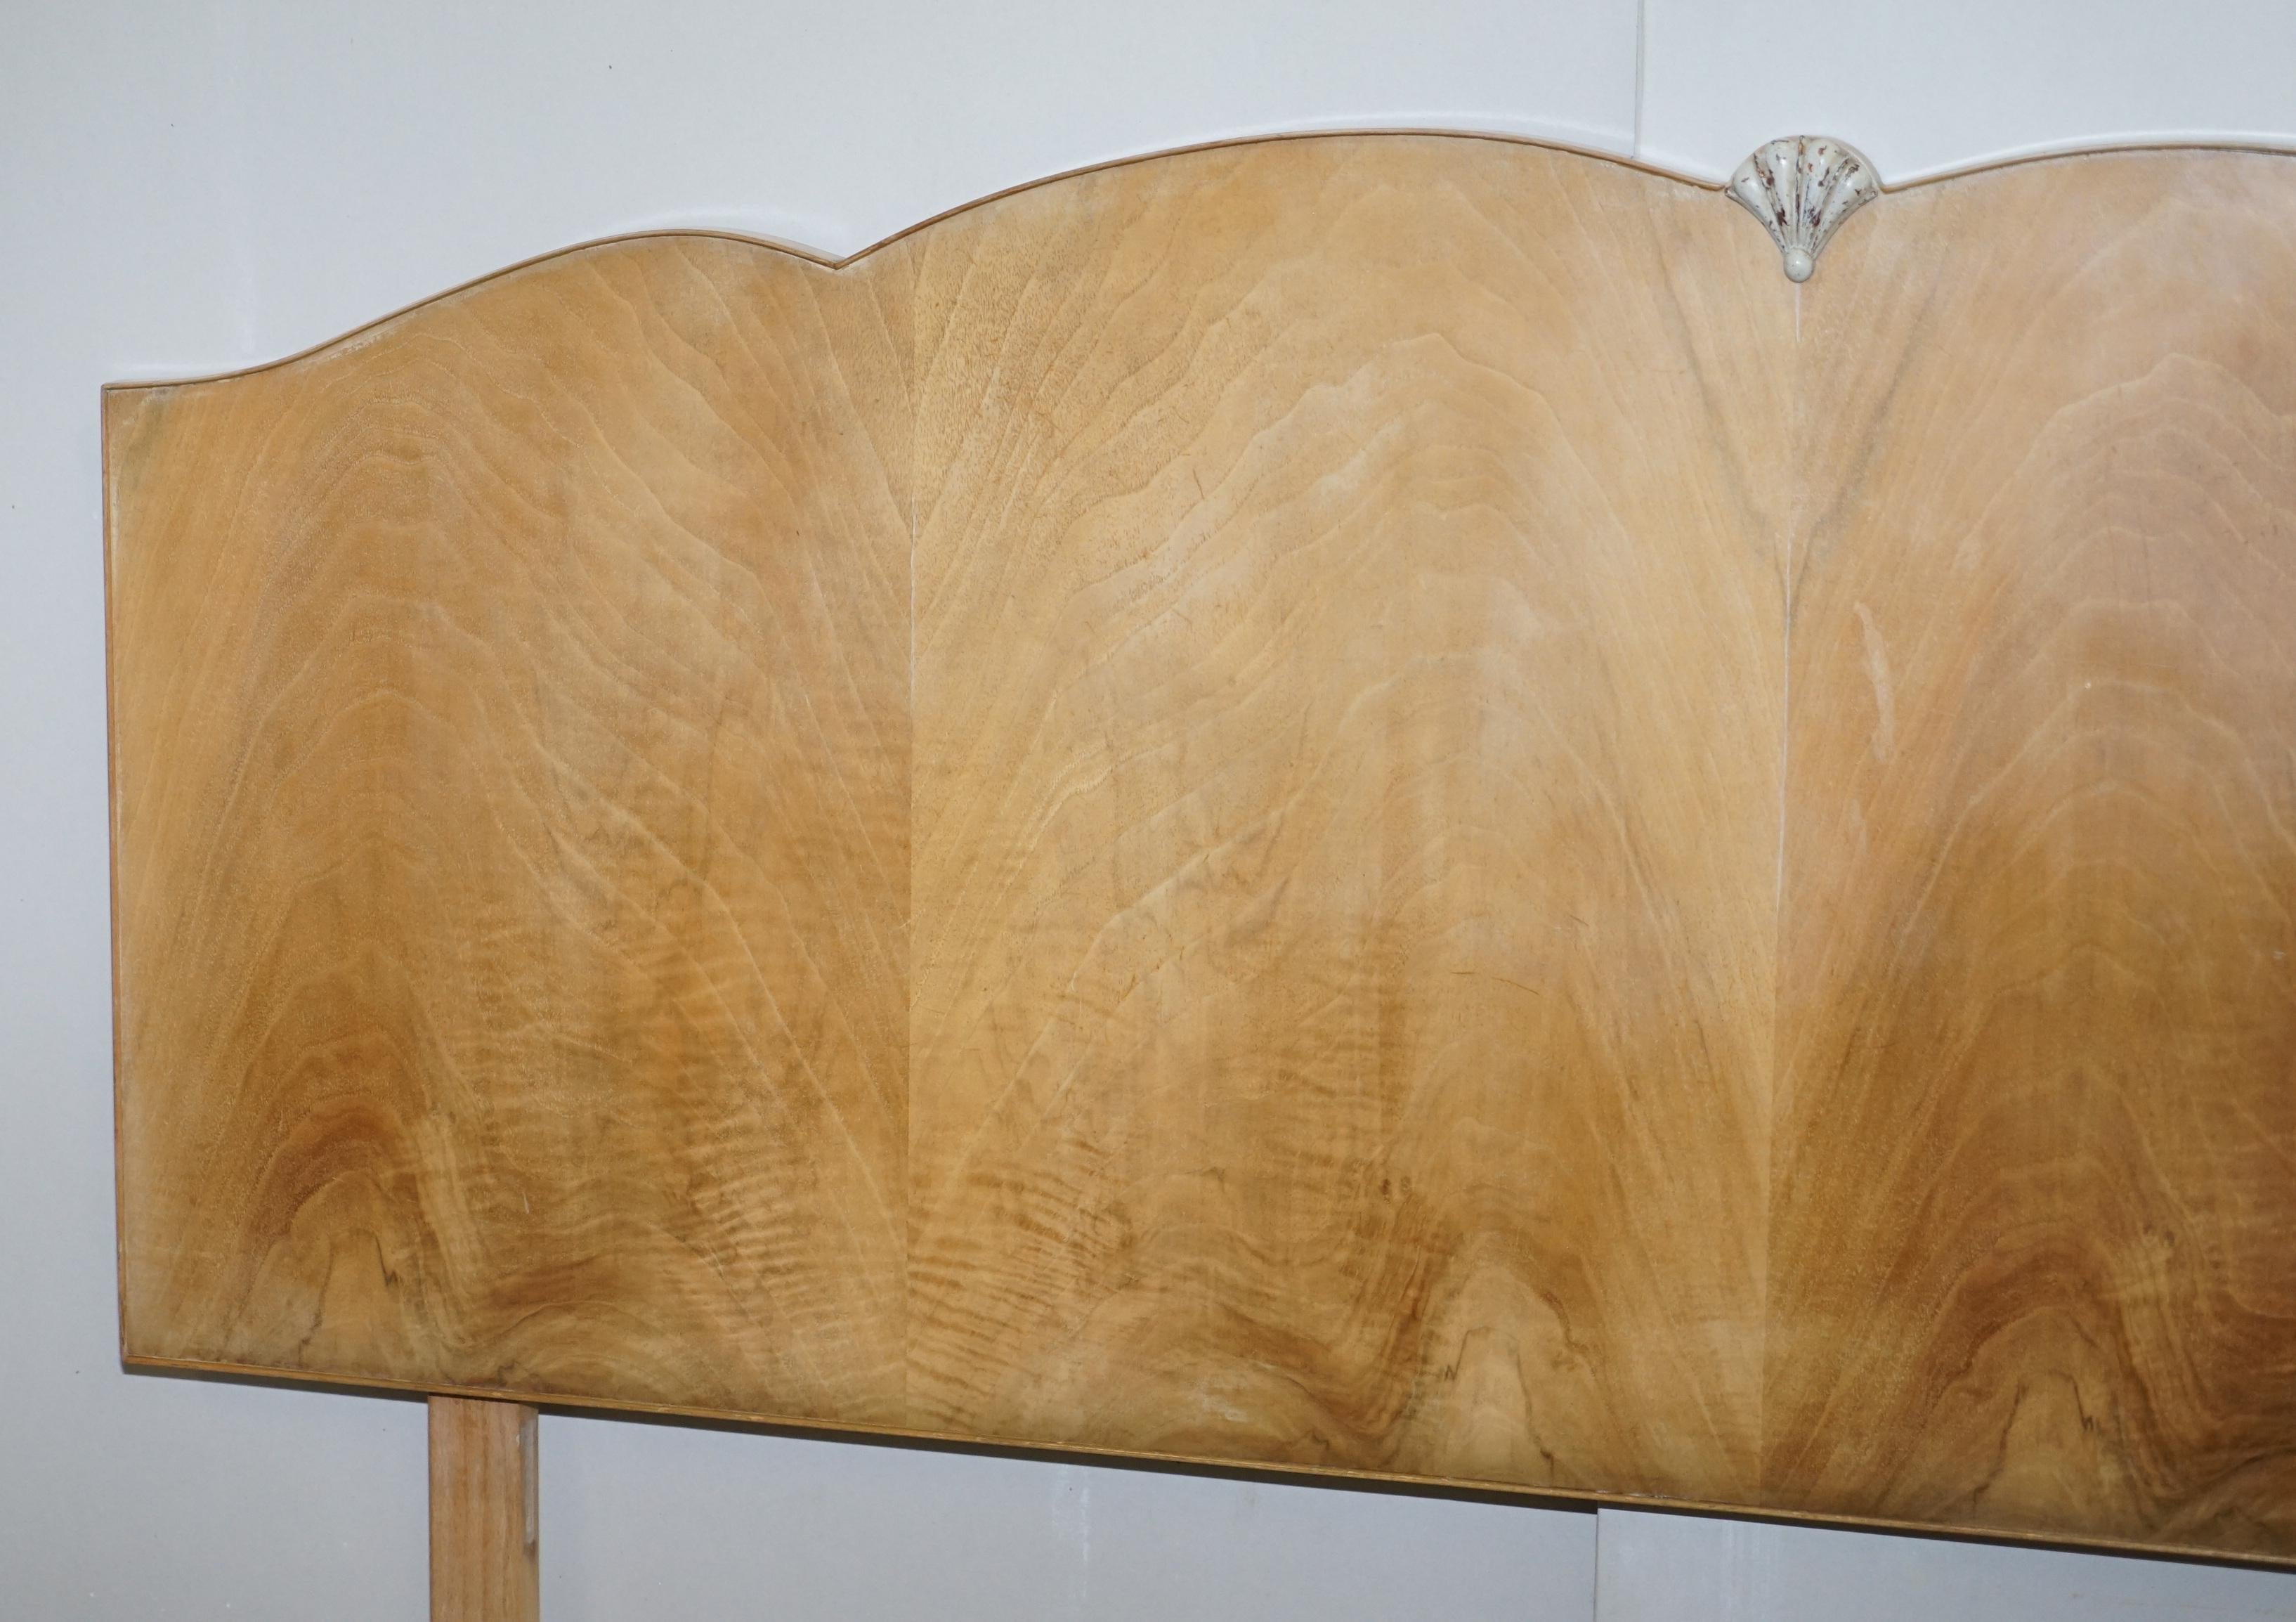 We are delighted to offer for sale this lovely Art Deco style burr light walnut single headboard which is part of a suite 

This piece is very well made indeed, the timber patina is sublime, it looks very French Deco! 

We have cleaned waxed and